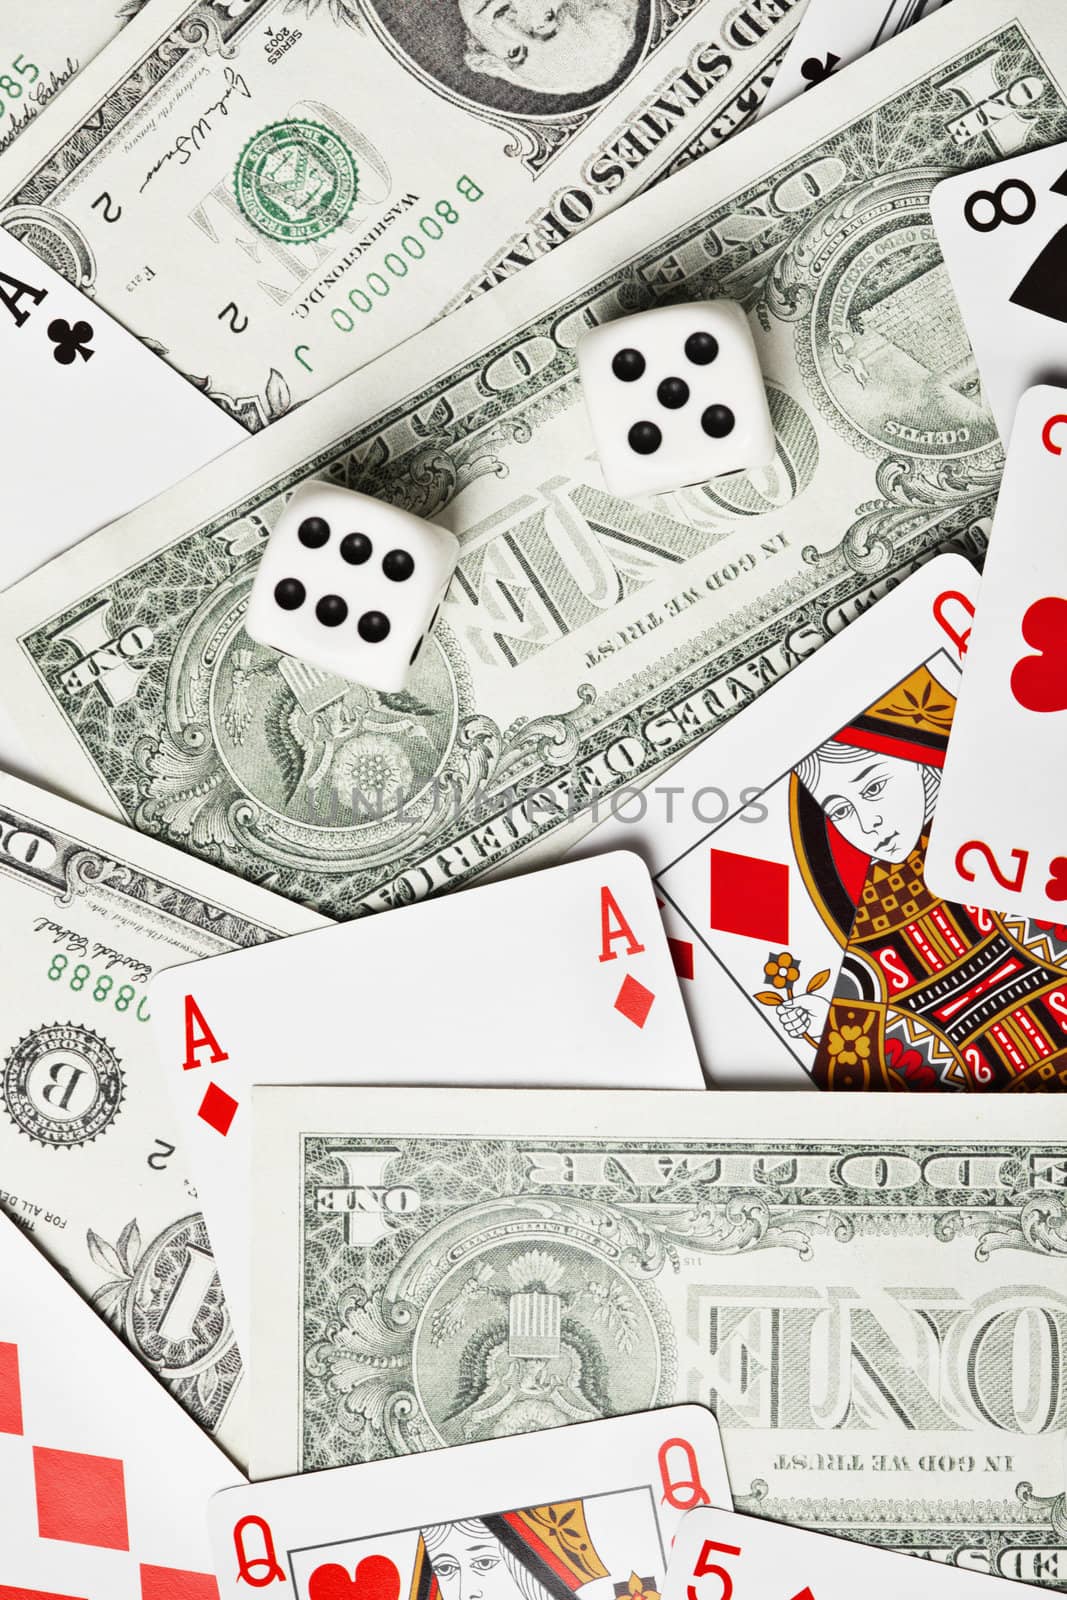 Background of the money, dice and playing cards